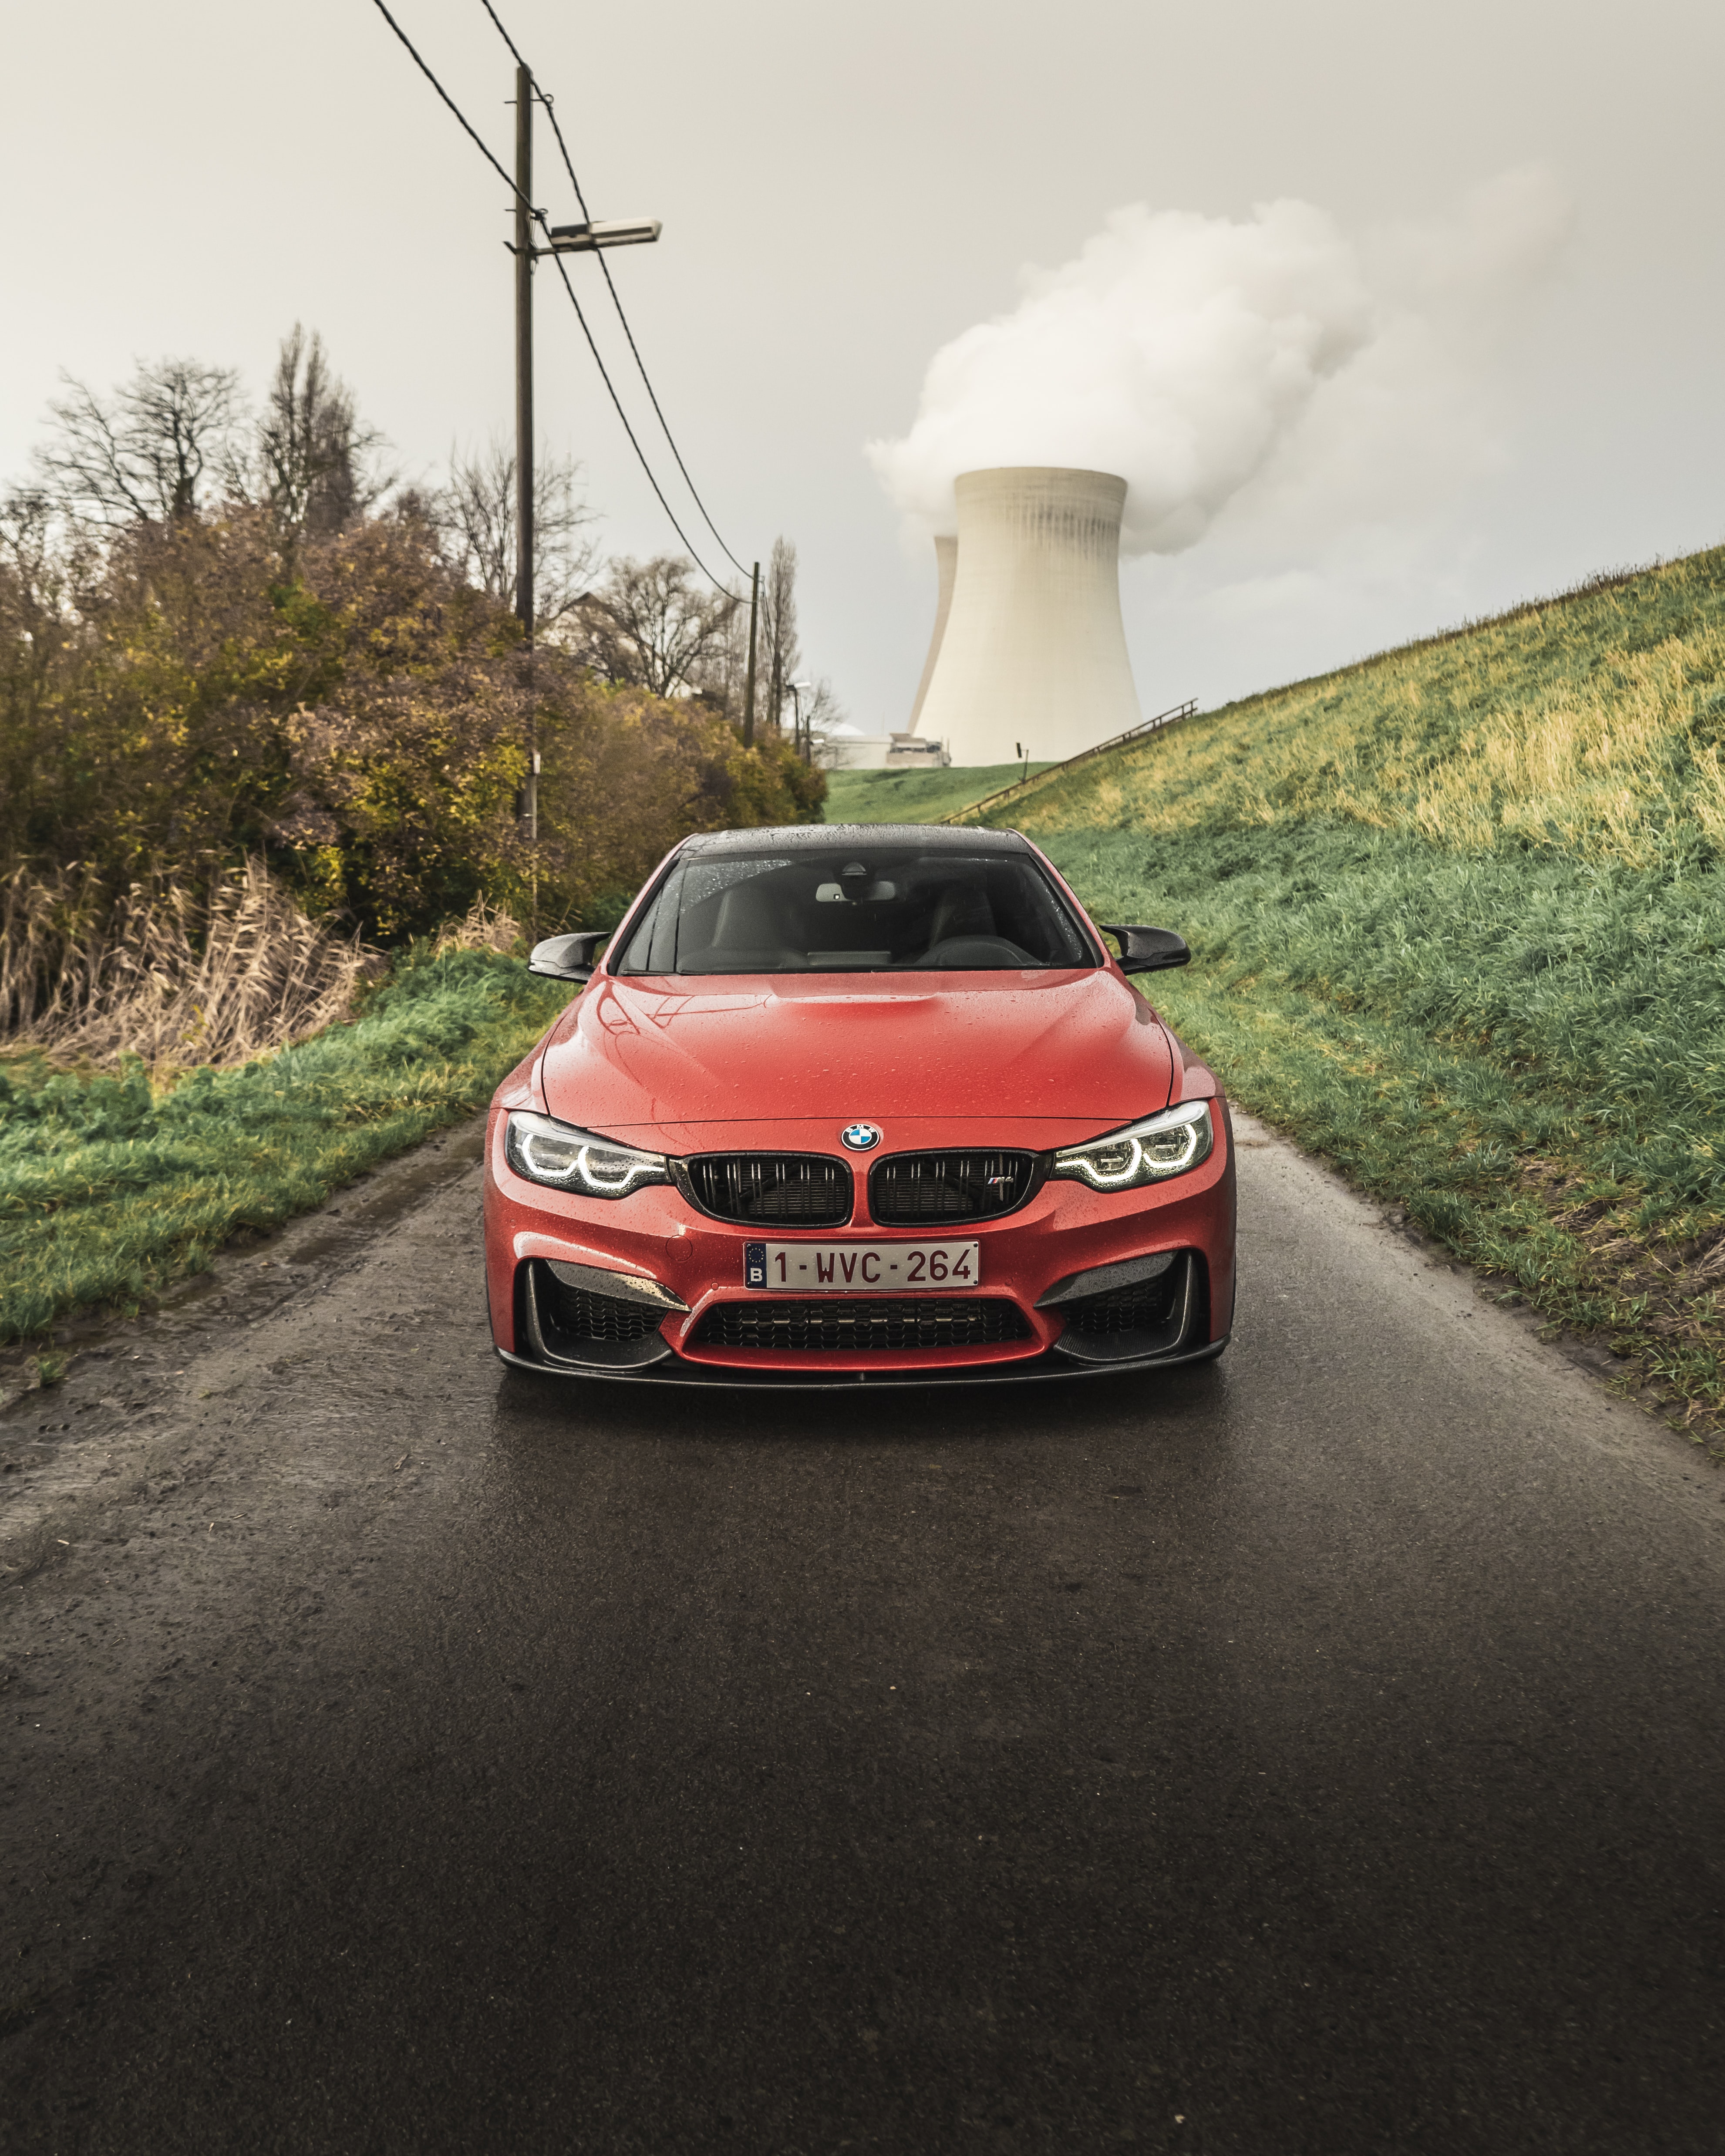 bmw, cars, red, car, front view, bmw m4 cellphone